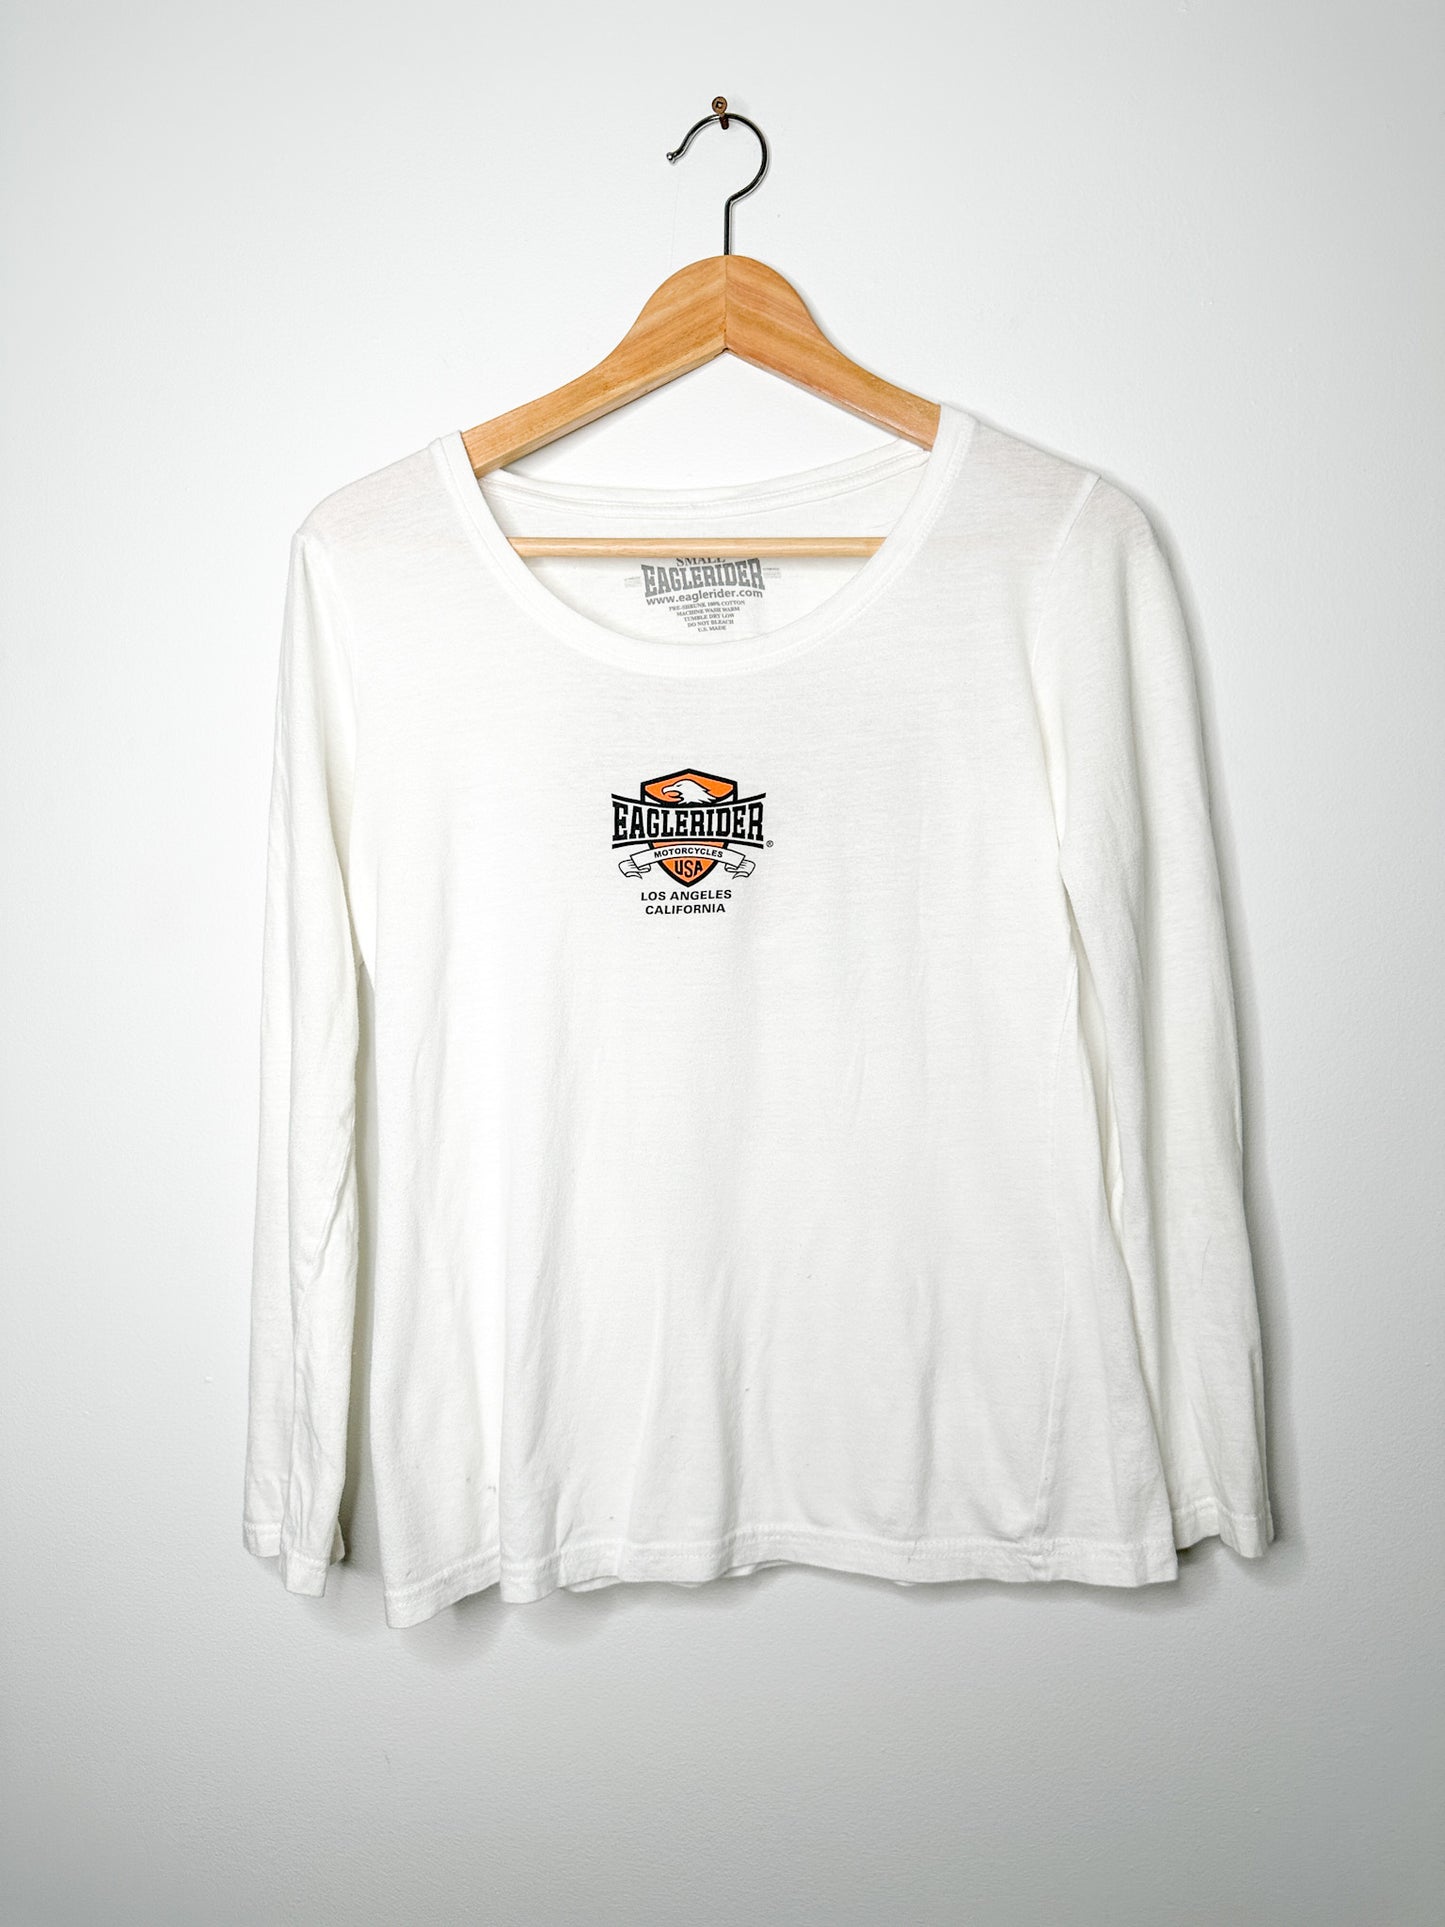 Vintage Eagle Rider T-Shirt Long Sleeves | Motorcycle T-shirts | Size: S